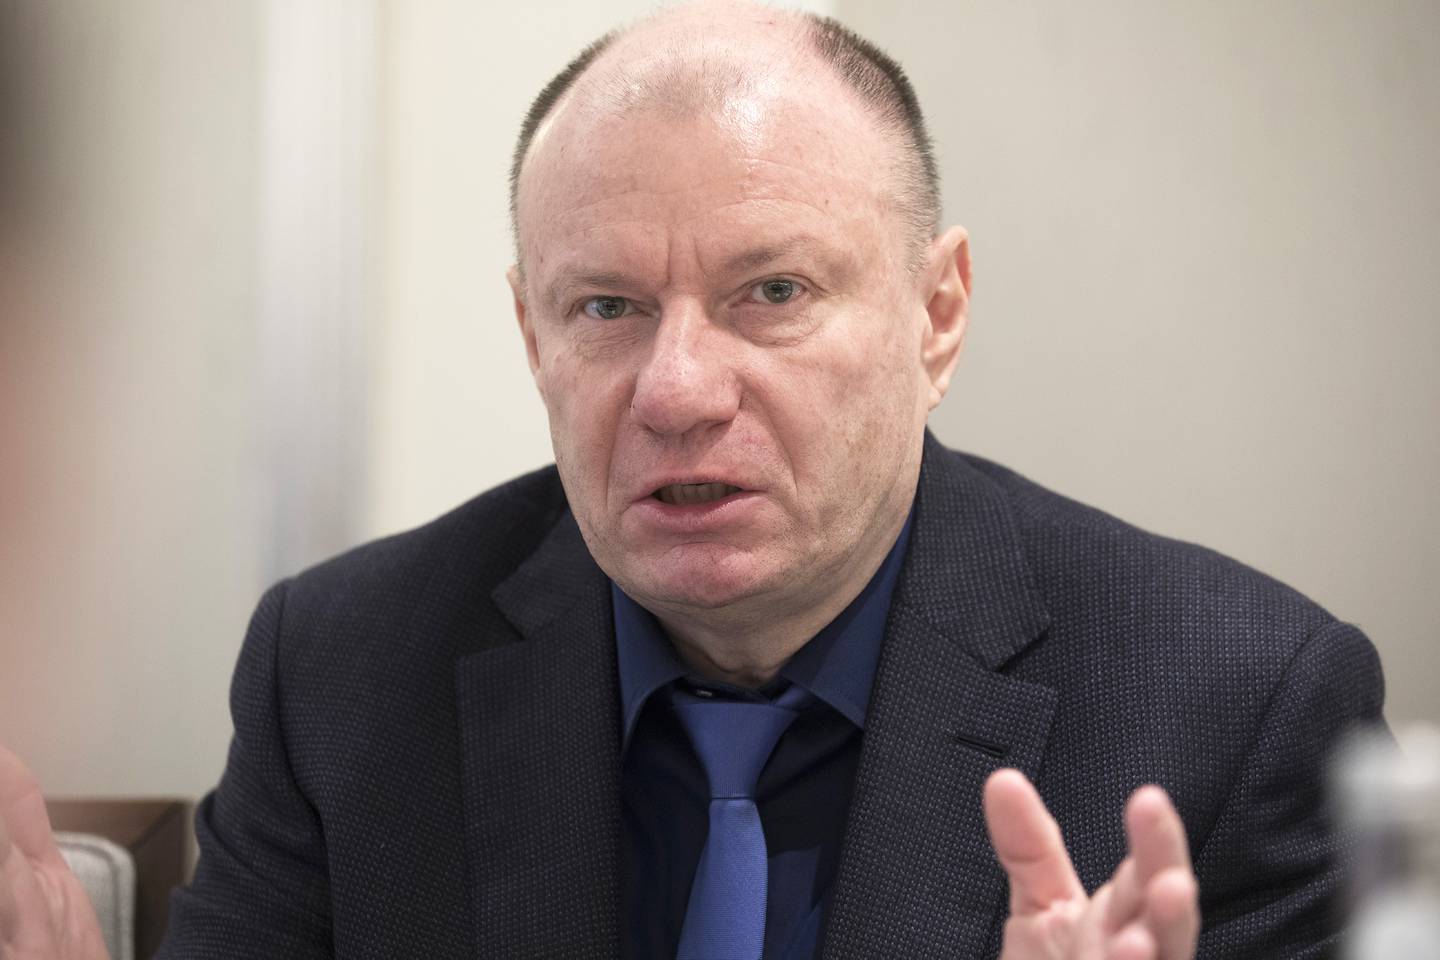 Vladimir Potanin, billionaire and owner of OAO GMK Norilsk Nickel, gestures as he speaks during an interview in London, U.K., on Monday, Nov. 20, 2017. Potanin is within a hair’s breadth of regaining his ranking as Russia’s richest tycoon this year. Photographer: Jason Alden/Bloomberg